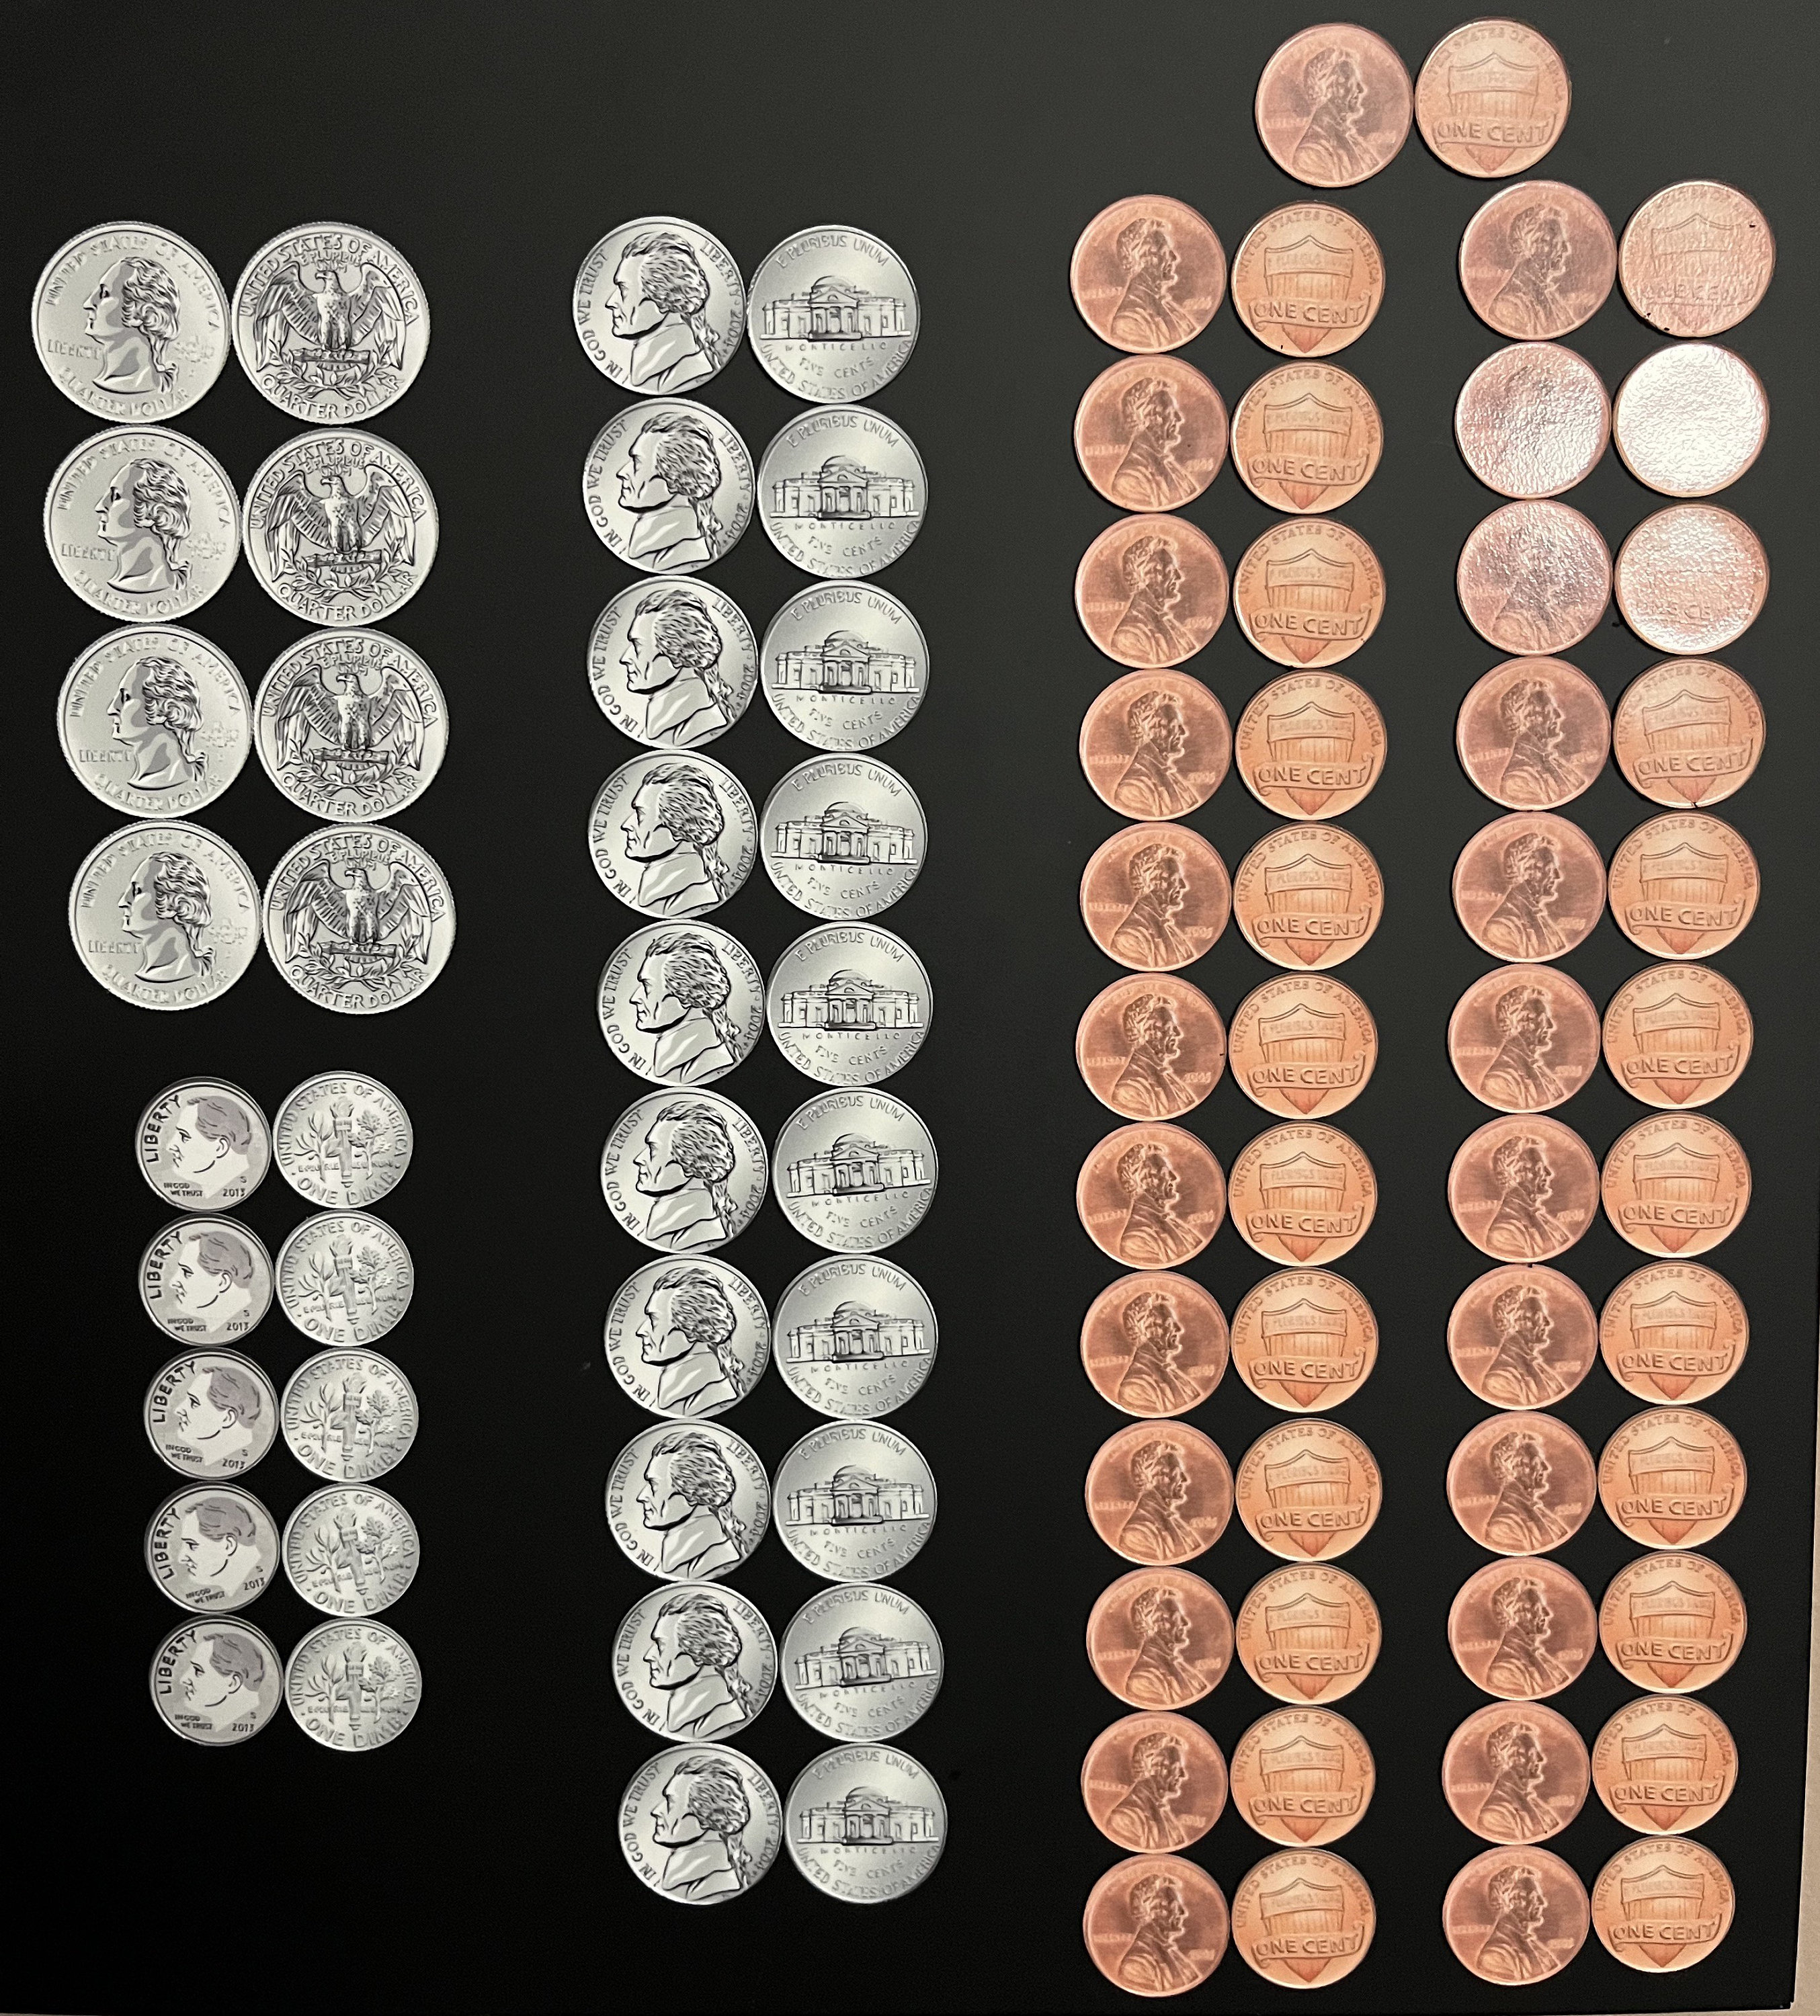 Counts & Sorts US Coin